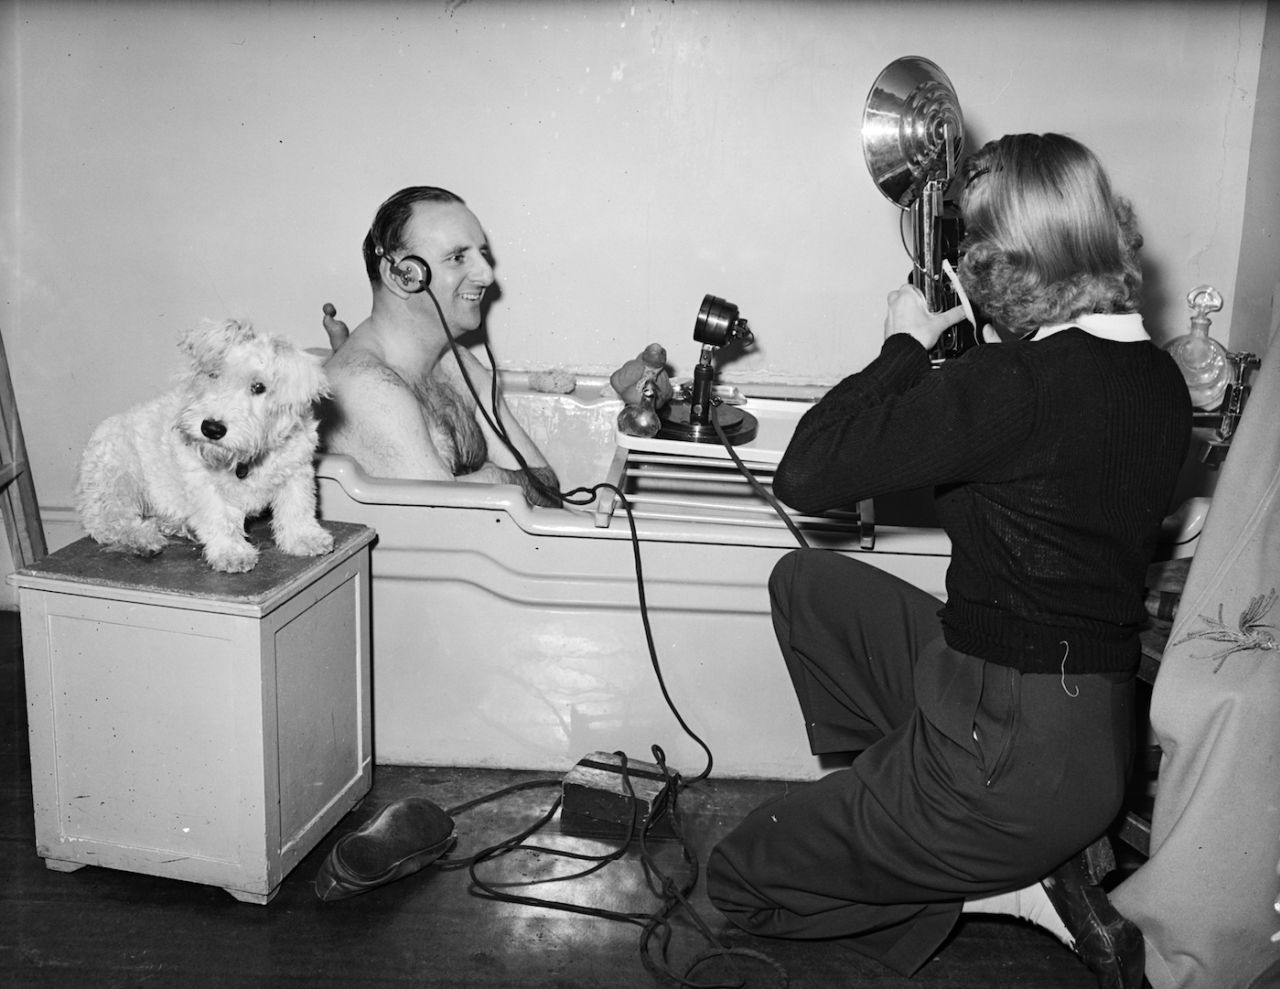 Cricket commentator Brian Johnston broadcasts from the bathtub, England, May 23, 1952